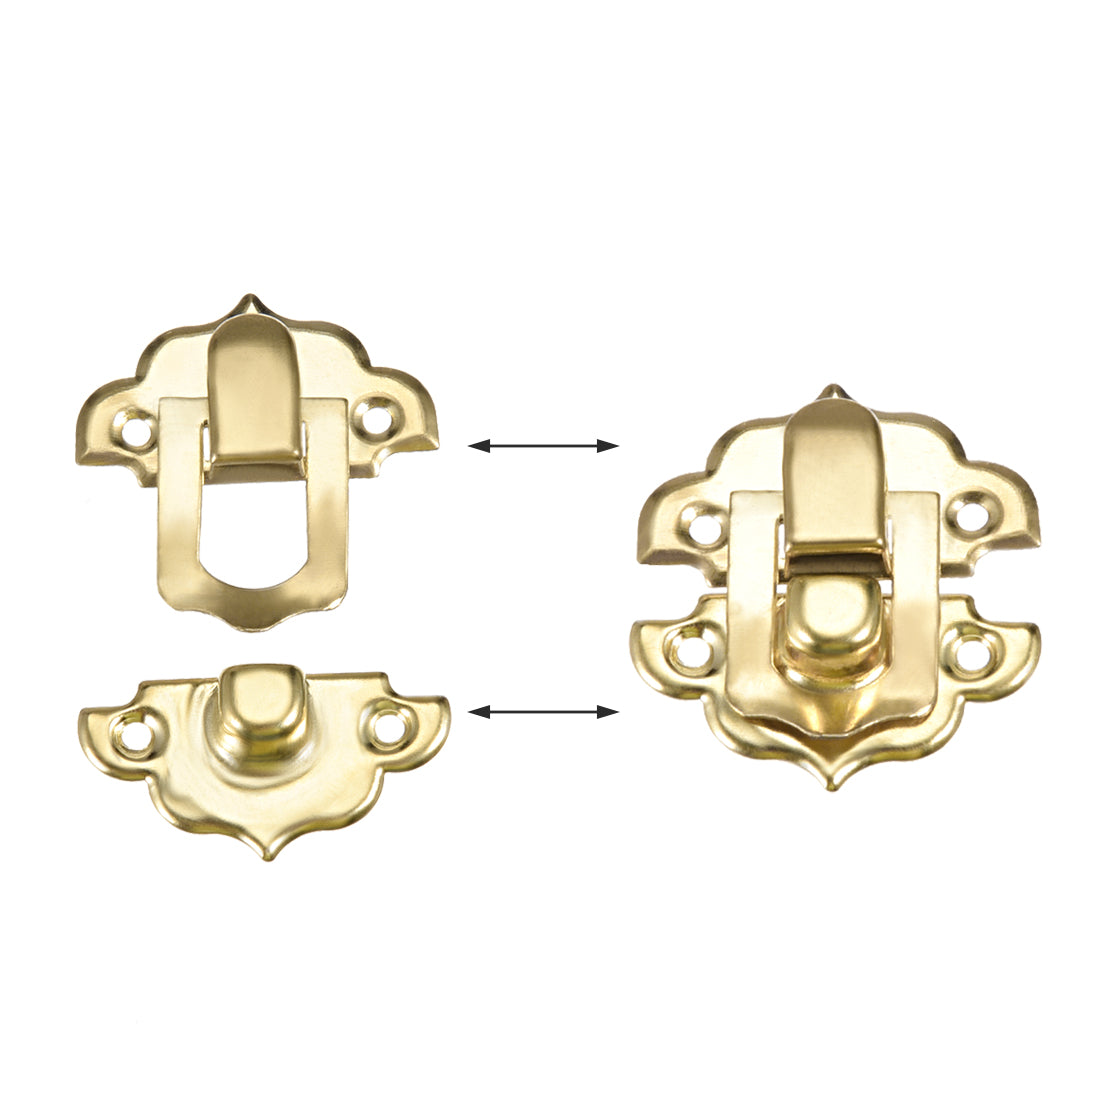 uxcell Uxcell Box Latch, Small Size Golden Decorative Hasp Jewelry cases Catch w Screws 8 Sets